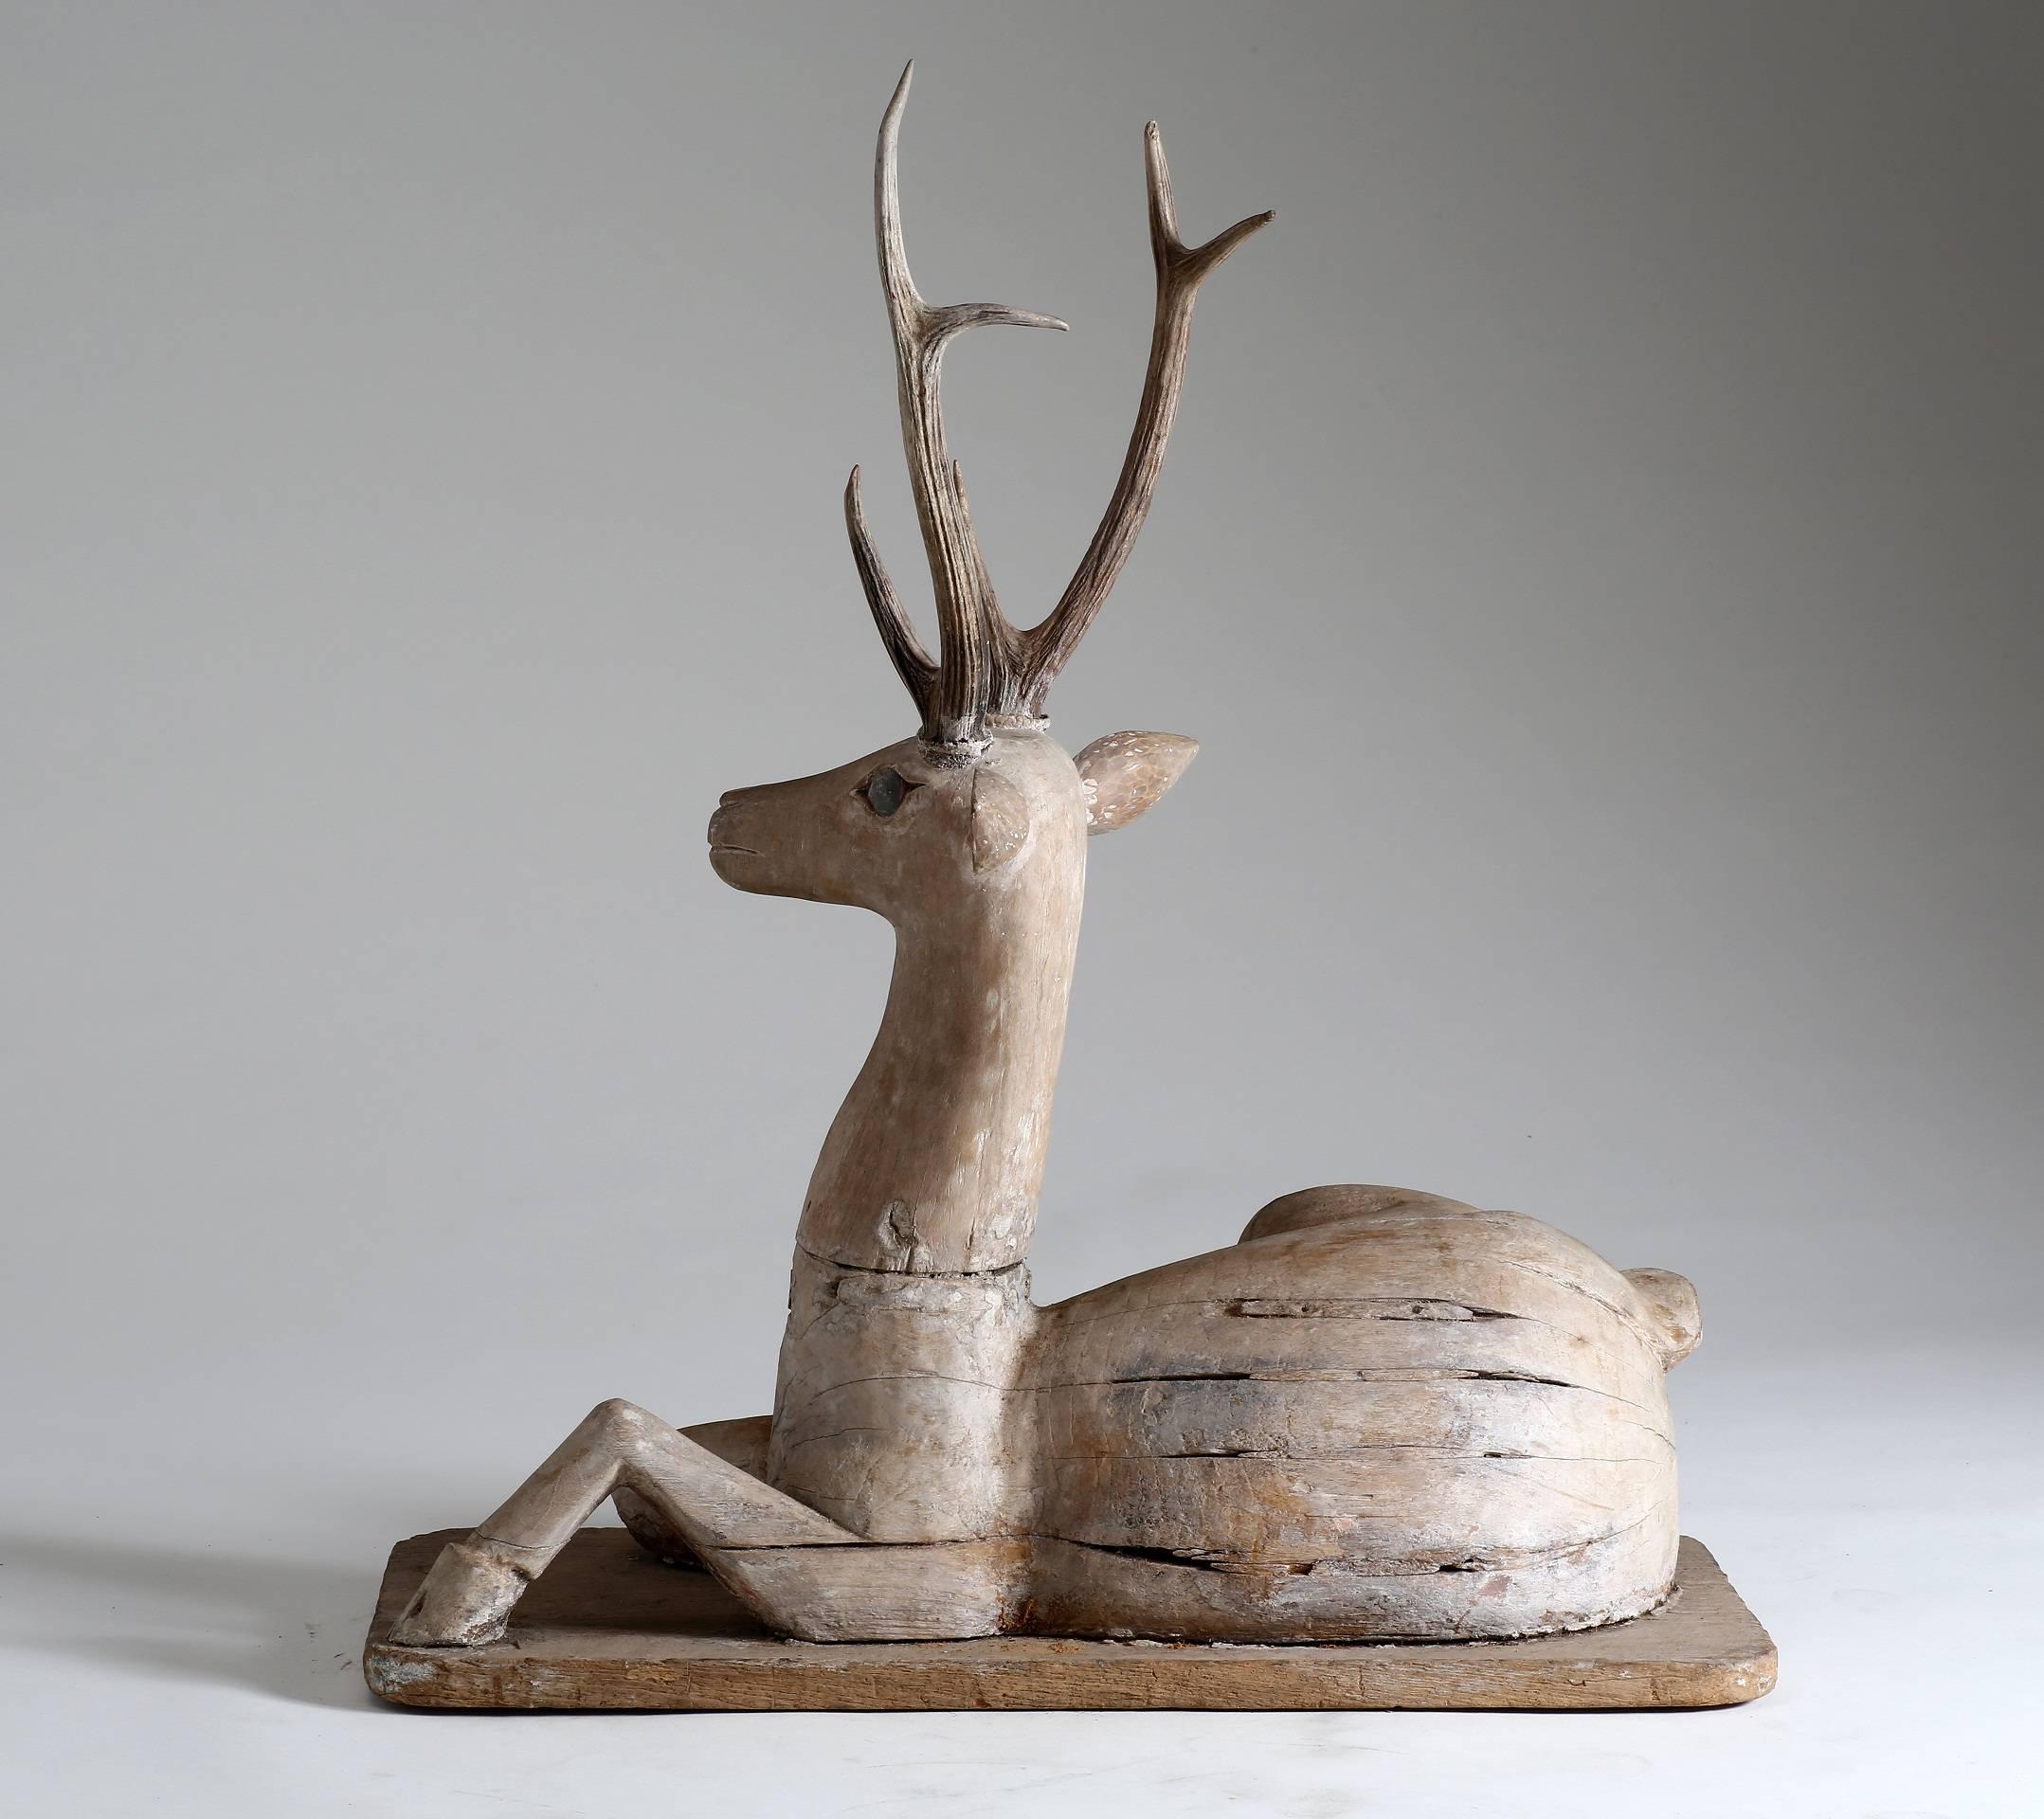 Fine carved wooden deer

The deer is realistically rendered and fully articulated, and the texture of wood realistically resembles the smoothness of the deer’s skin. 

Late 19th century
Thailand 
28 ¼ in L x 11 ½ in D x 33 ½ in H
(72 cm x 29